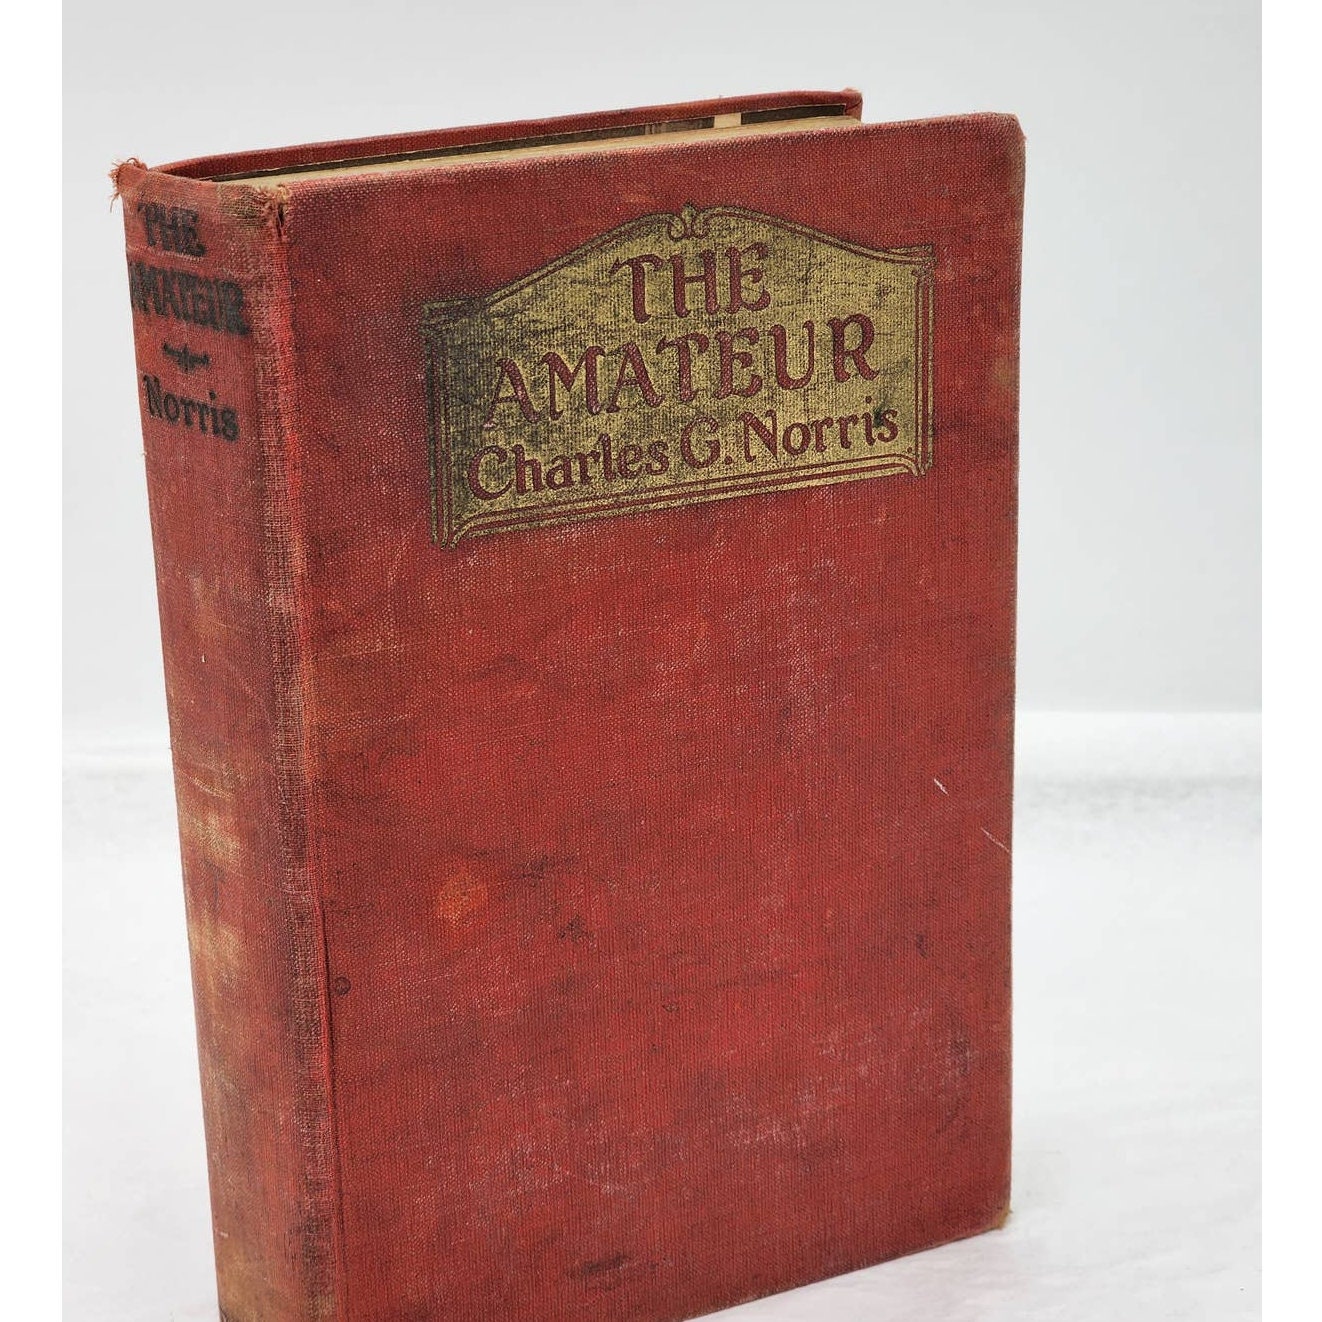 The Amateur by Charles G